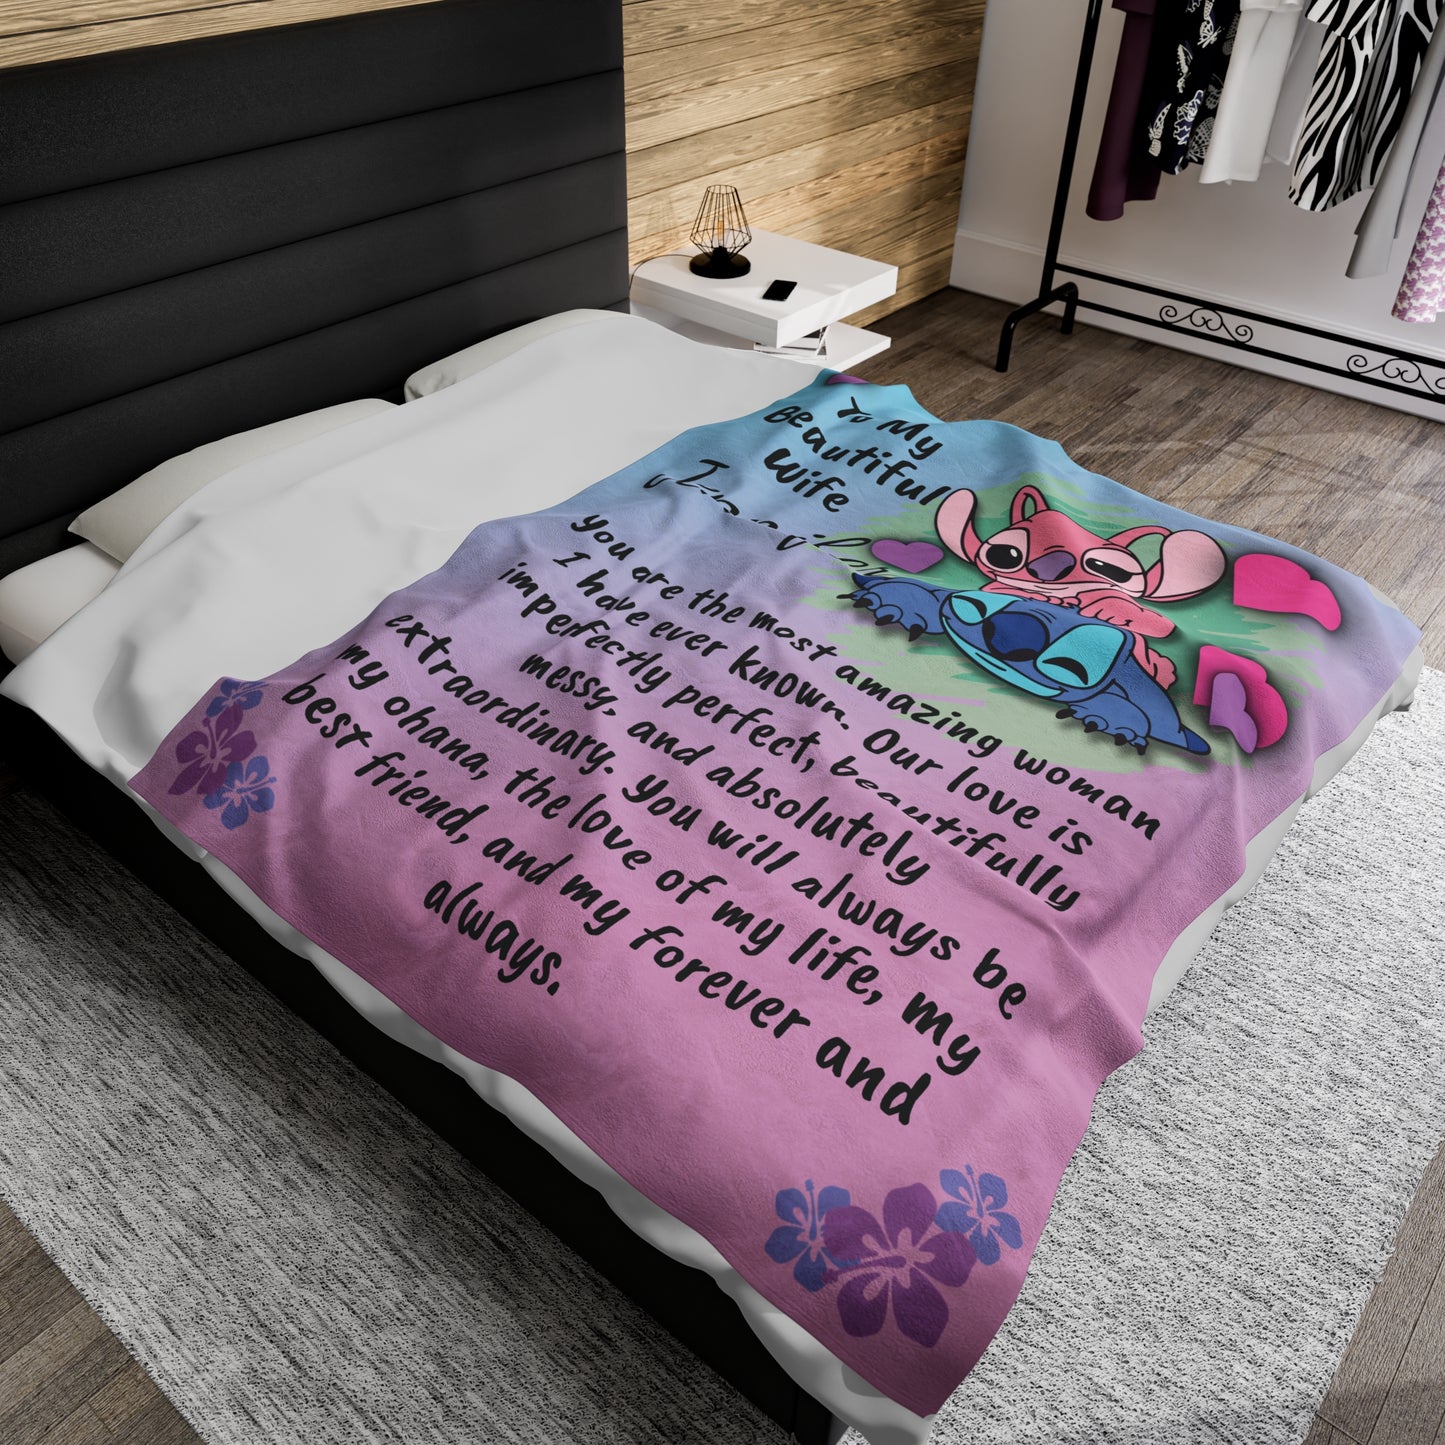 Personalized alien blanket for wife, gift for wife, gift to wife from husband, couch blanket, movie blanket, reading blanket, throw blanket